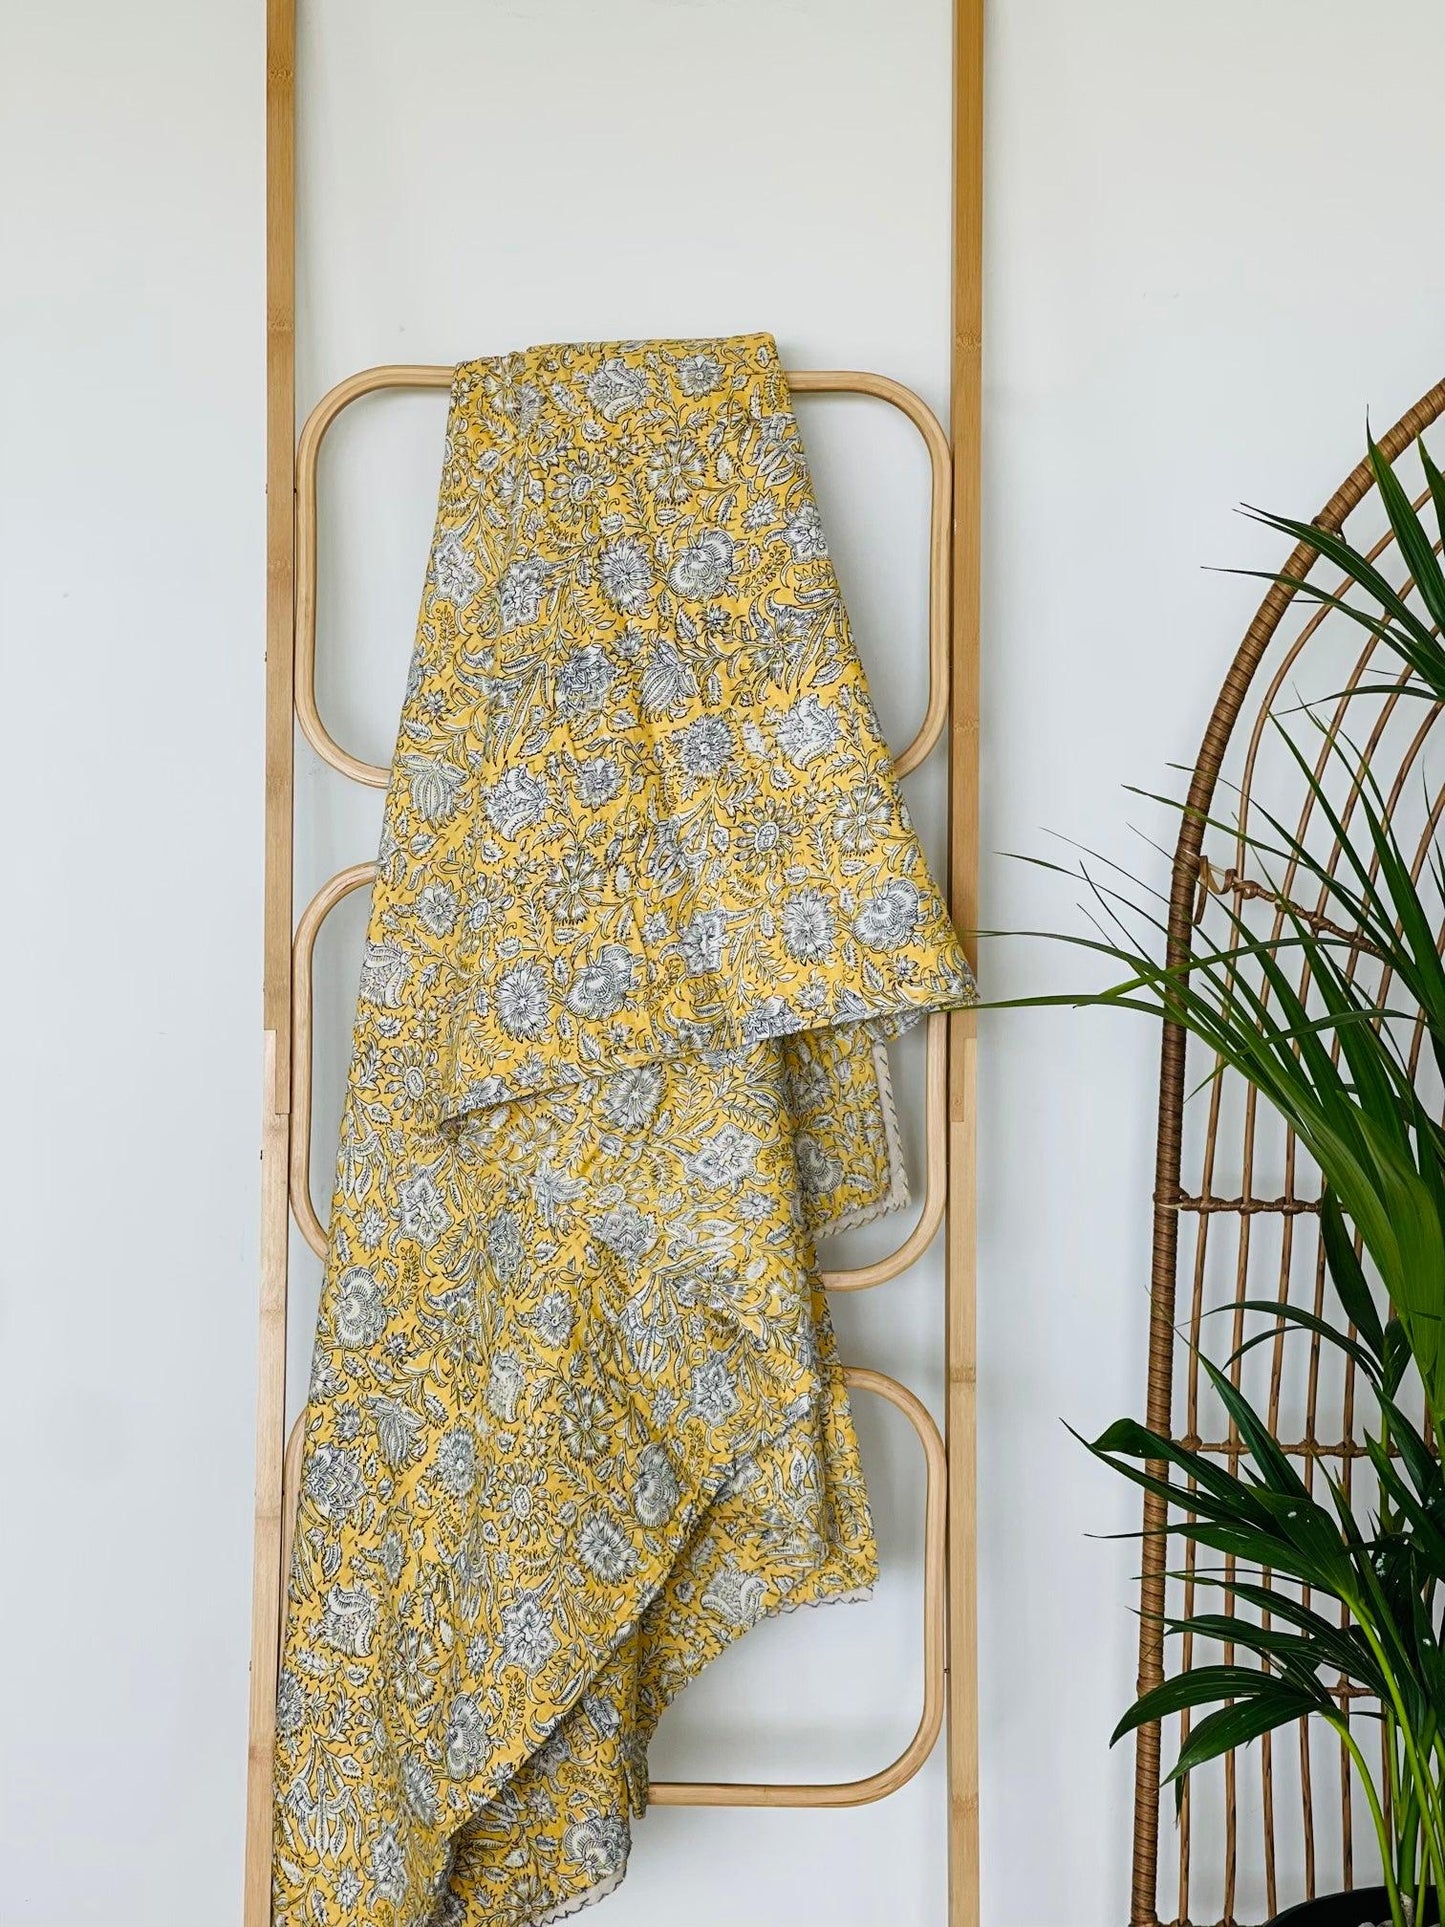 Mustard Floral Cotton Kantha Quilt: Artisan Crafted Bedspread & Blanket - Rooii by Tuvisha